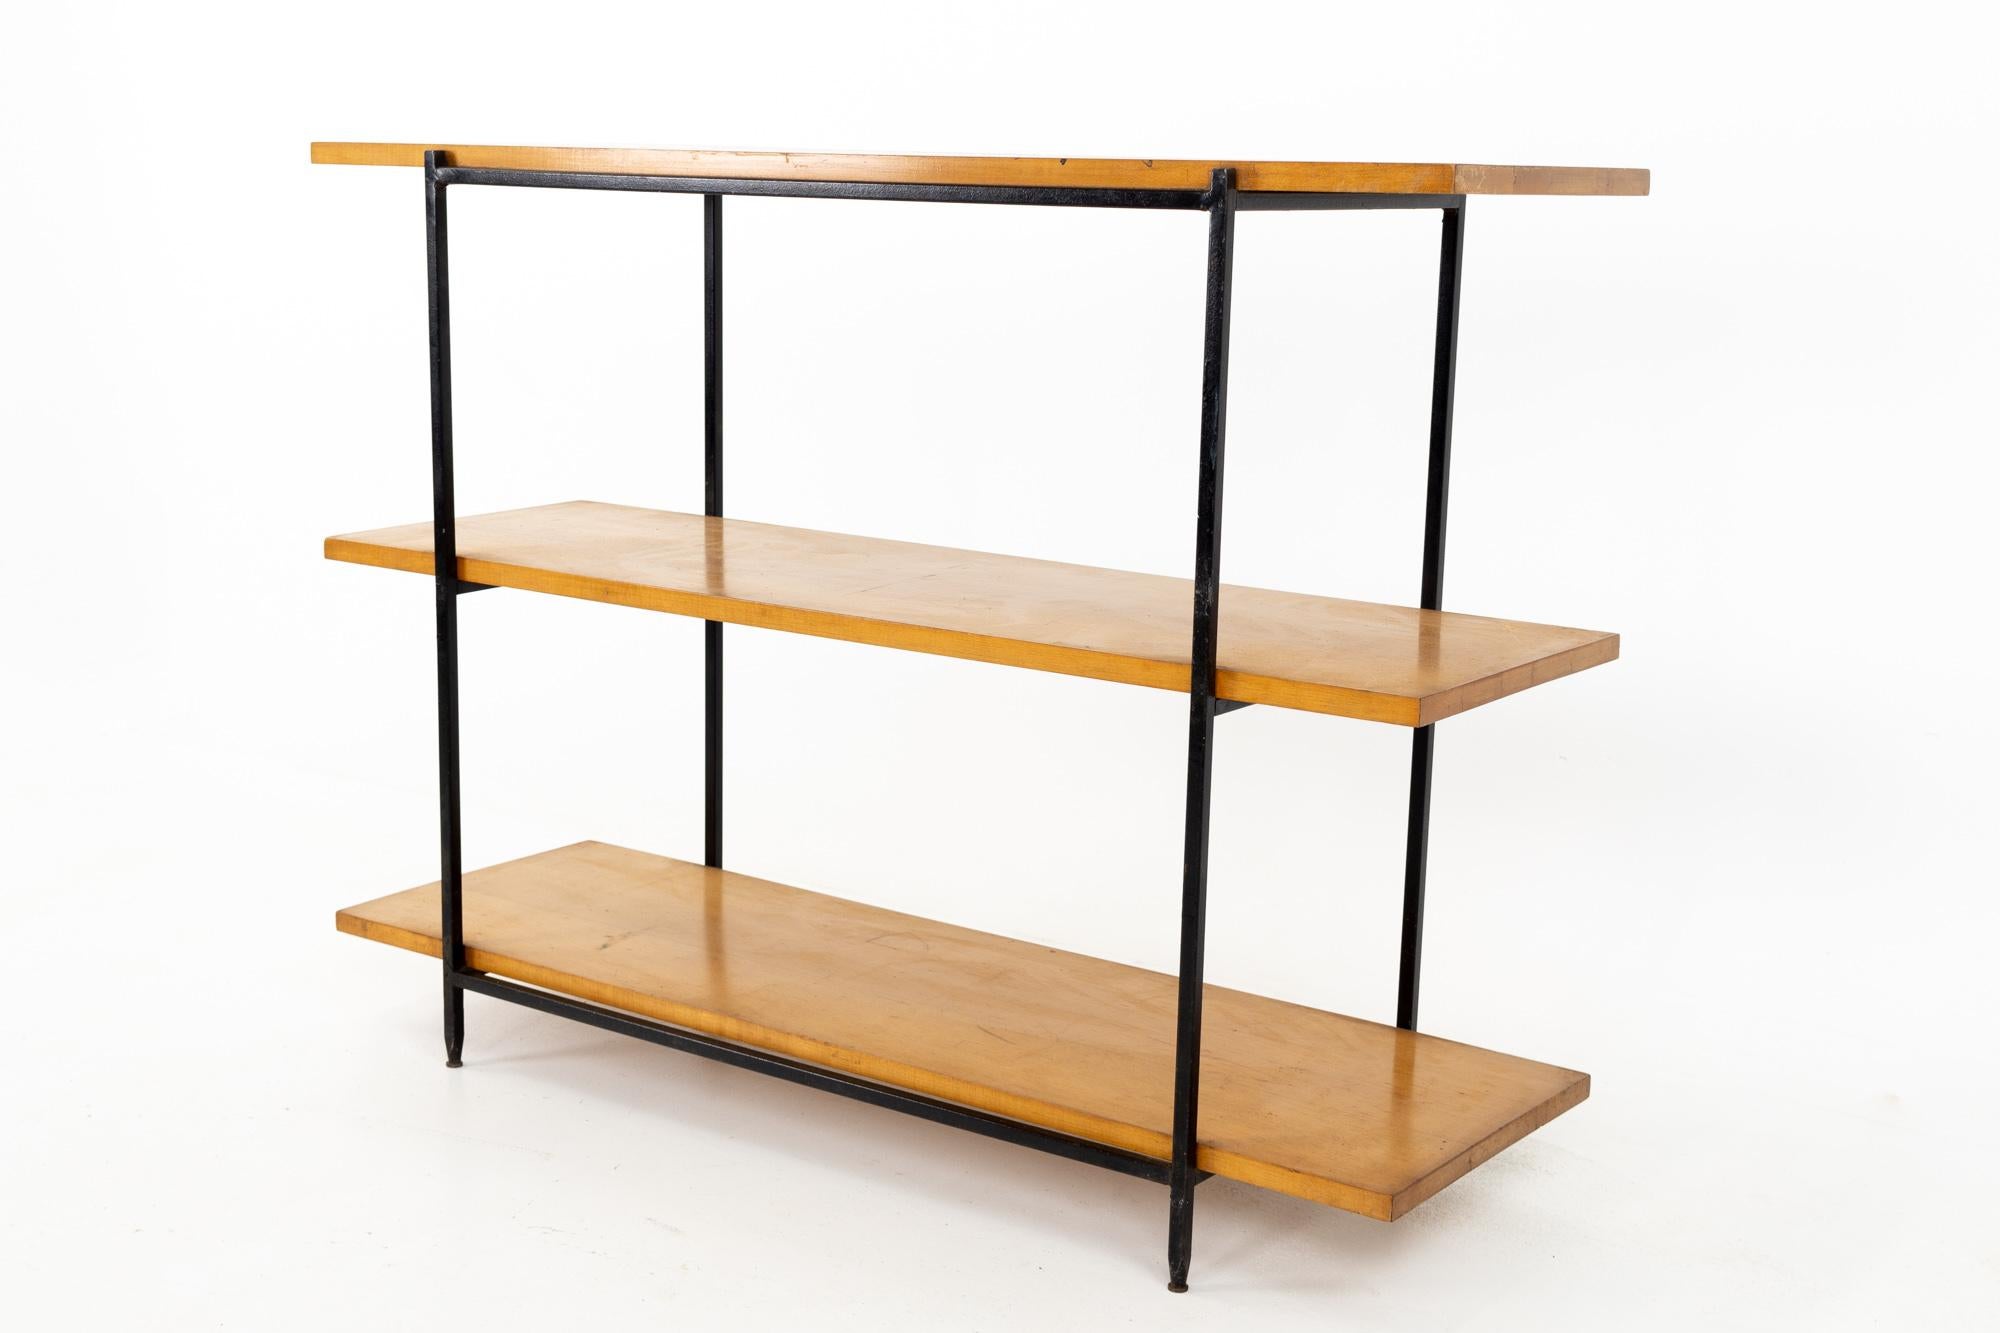 Milo Baughman for Murray Furniture mid century book shelf console table
This shelf is 40.25 wide x 13.25 deep x 29.75 inches high

All pieces of furniture can be had in what we call restored vintage condition. That means the piece is restored